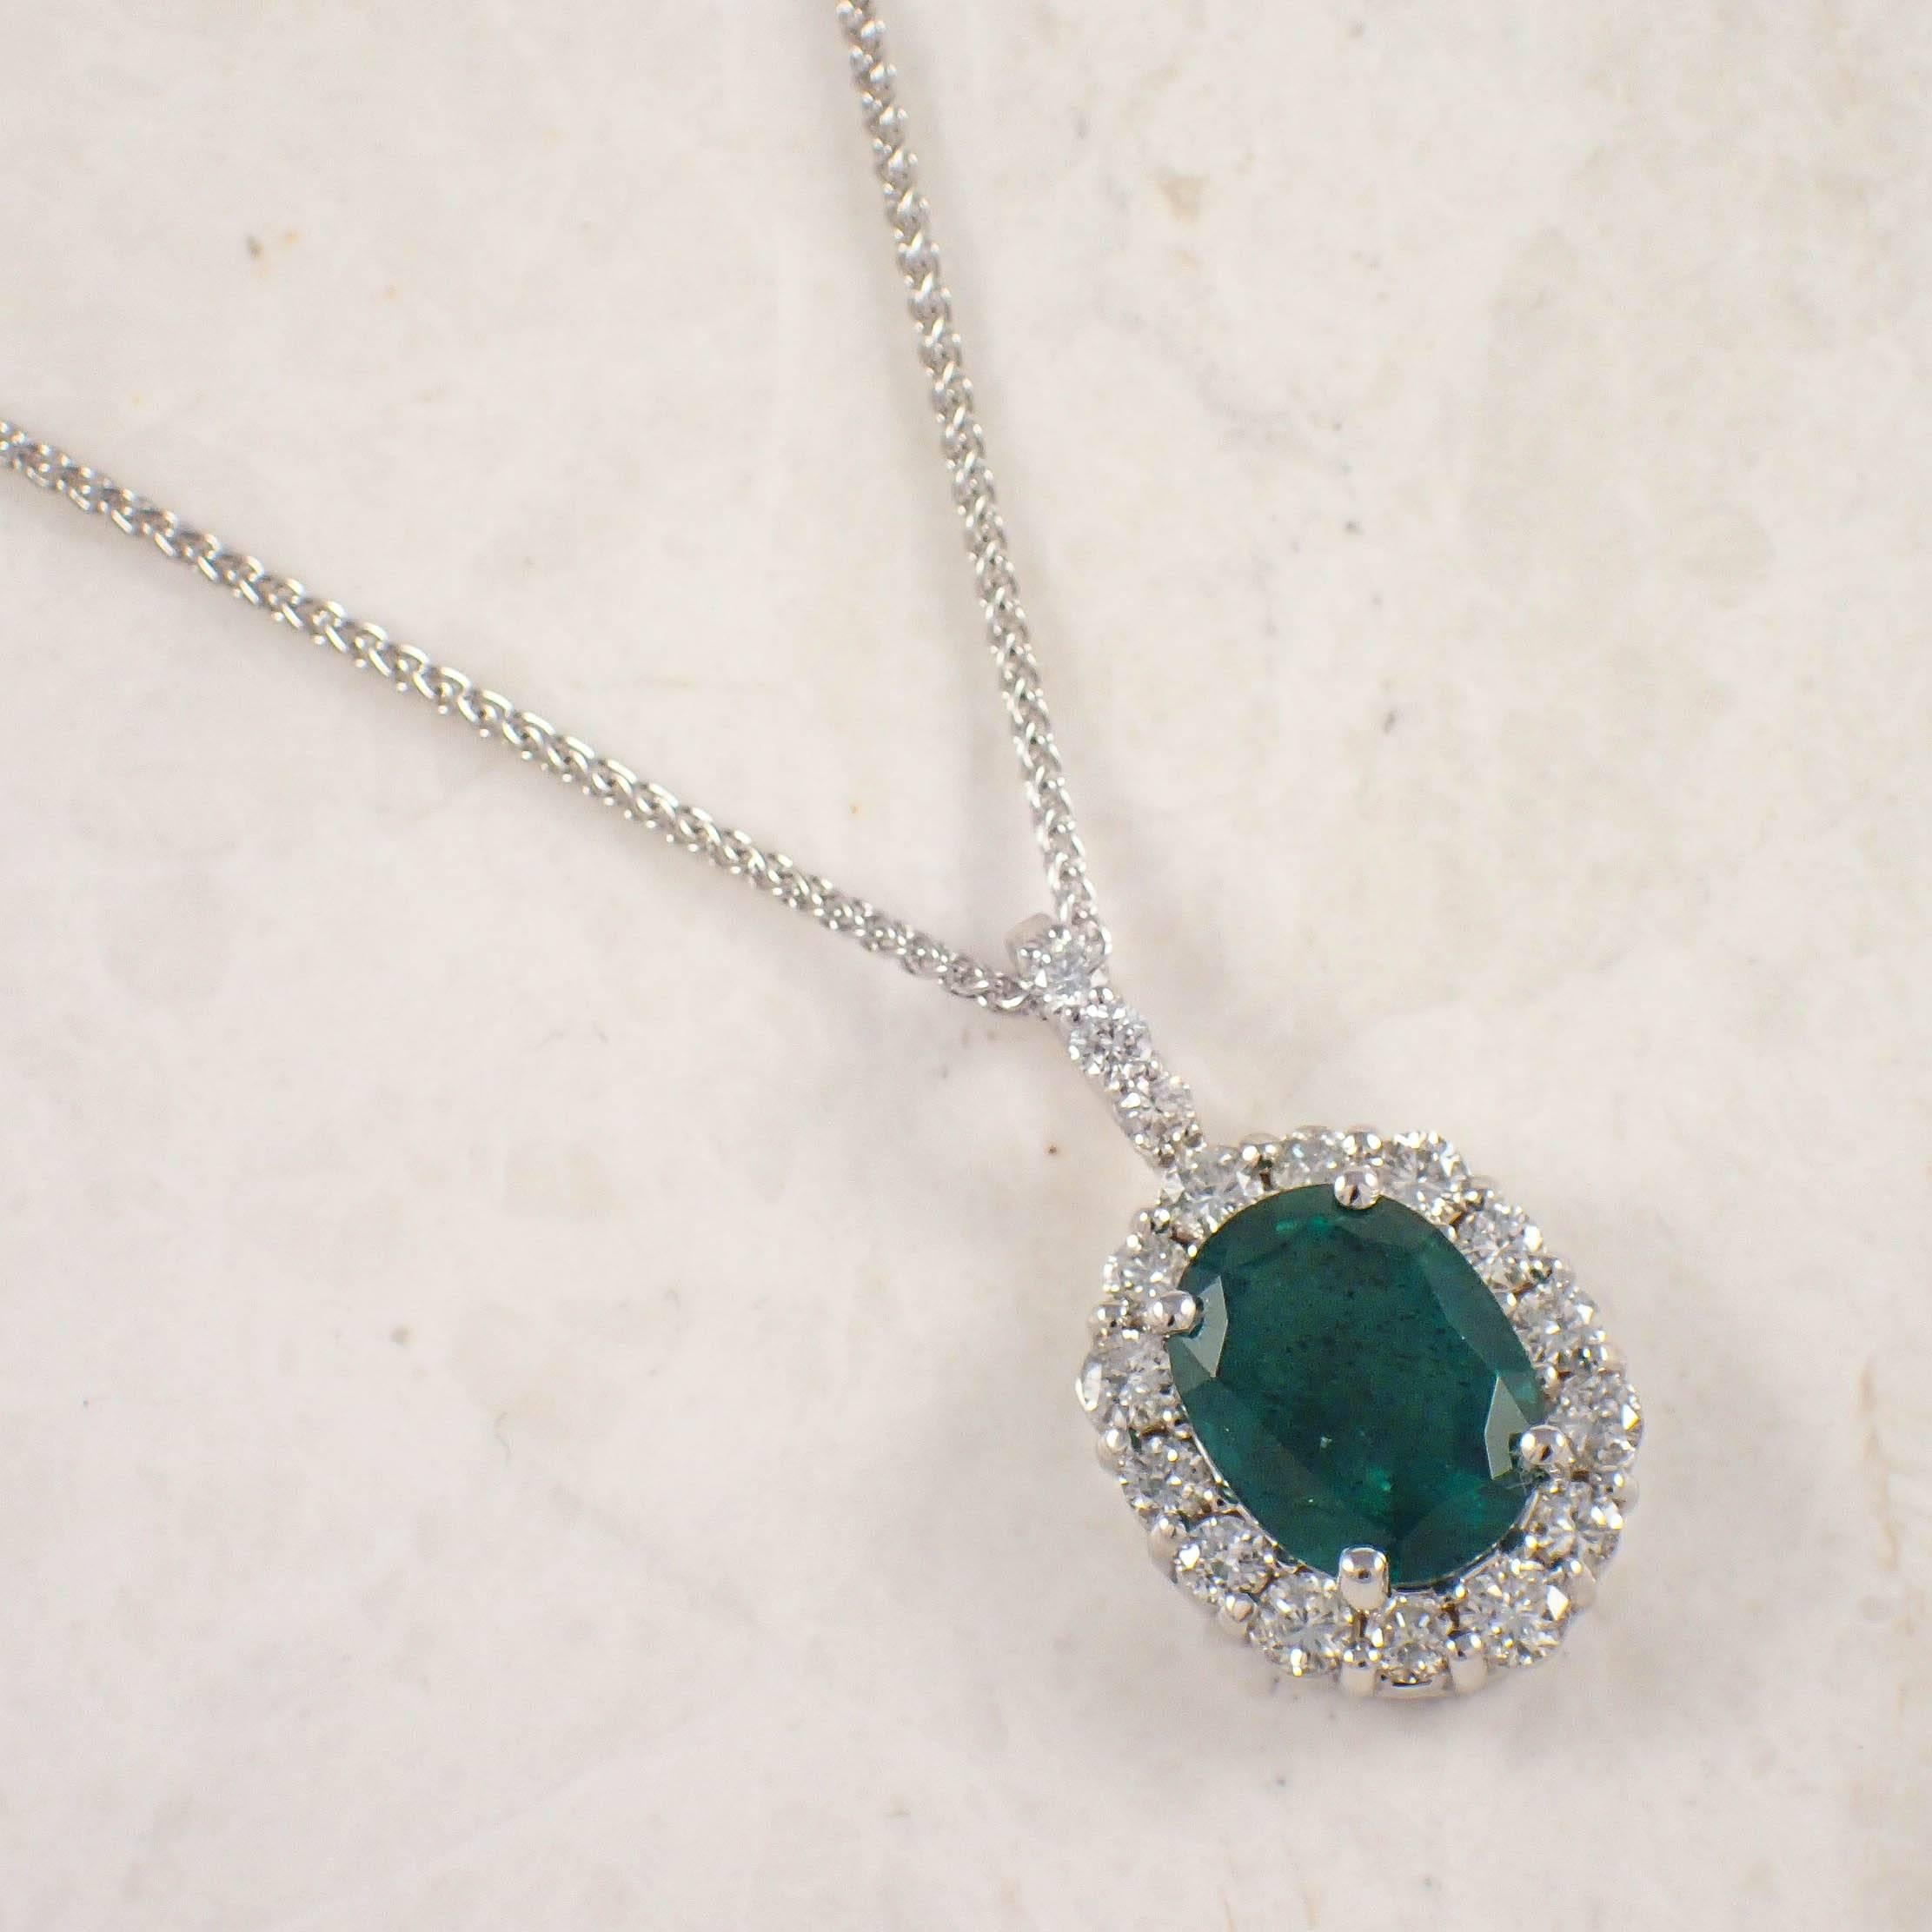 14K White gold emerald and diamond pendant. The cluster style pendant is prong set with an approximately 3.20 carat oval emerald measuring 11.3 X 8.7 mm, surrounded by 17 round diamonds weighing approximately 1.00 carat total. The pendant is